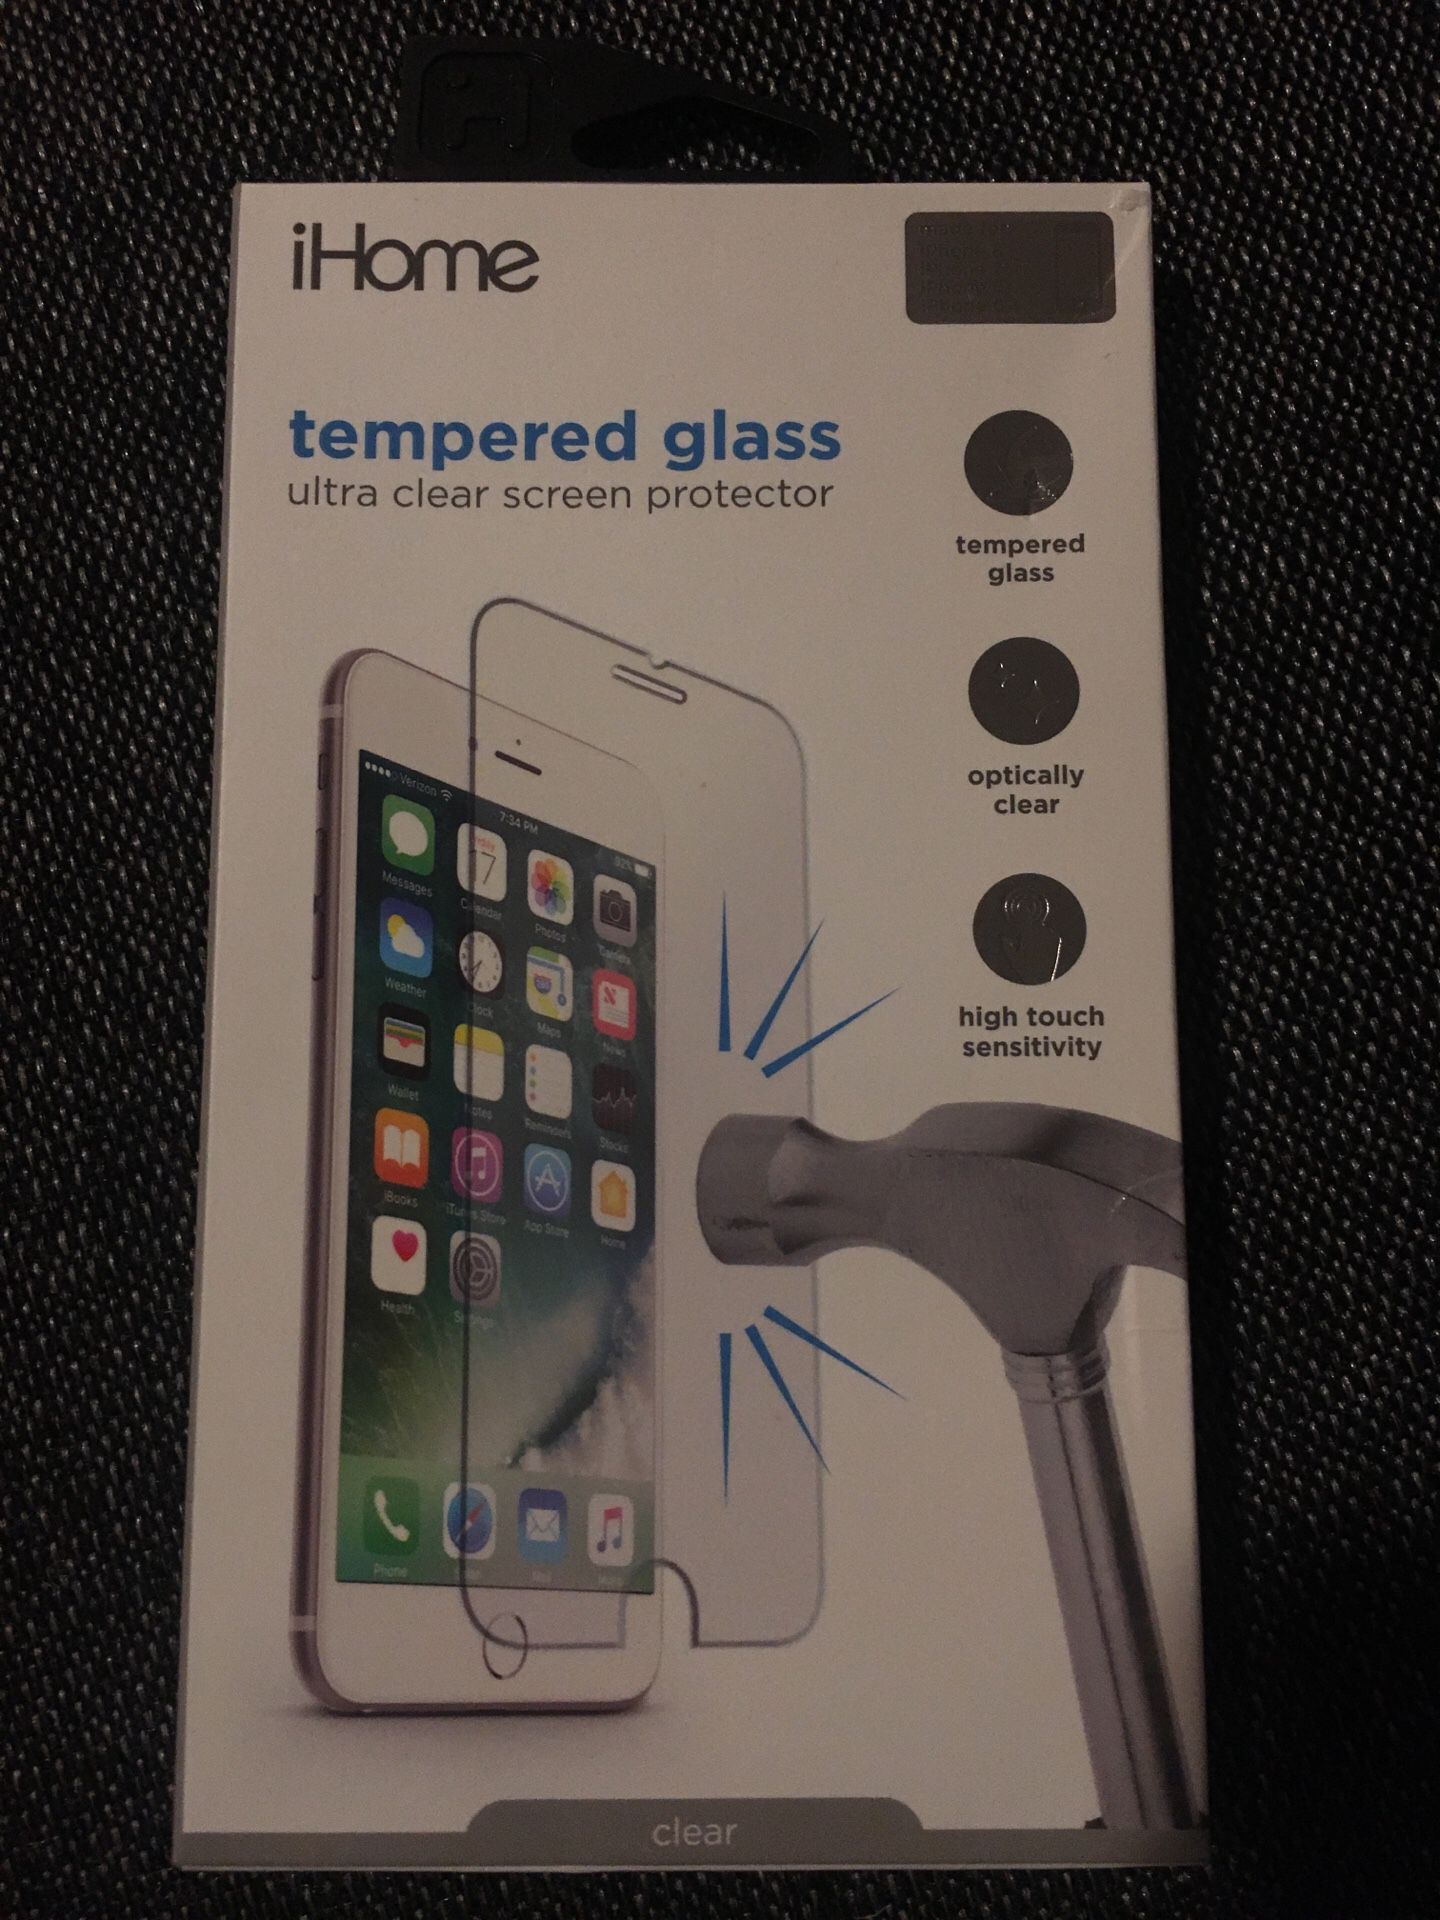 IHome tempered glass for iPhone 8/7/6s/6